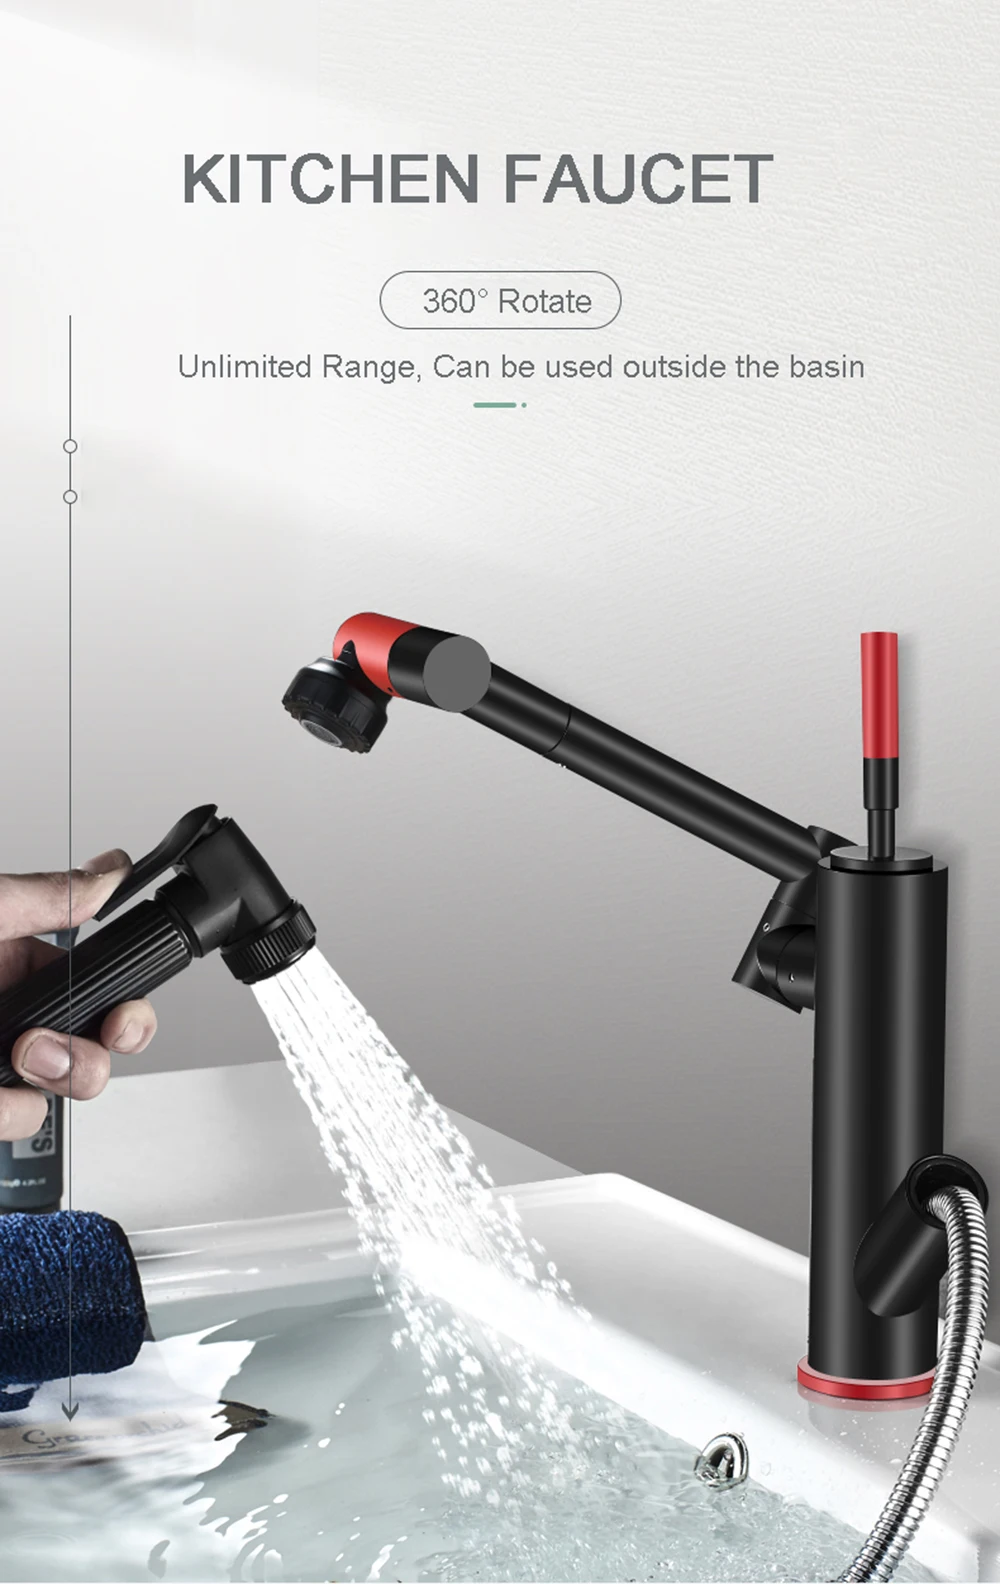 POIQIHY Black 360 Degree Rotate Kitchen Faucet Pull Out Sprayer Gun Dual Mode Spout Bathroom Kitchen Mixer Tap Foldable Faucet